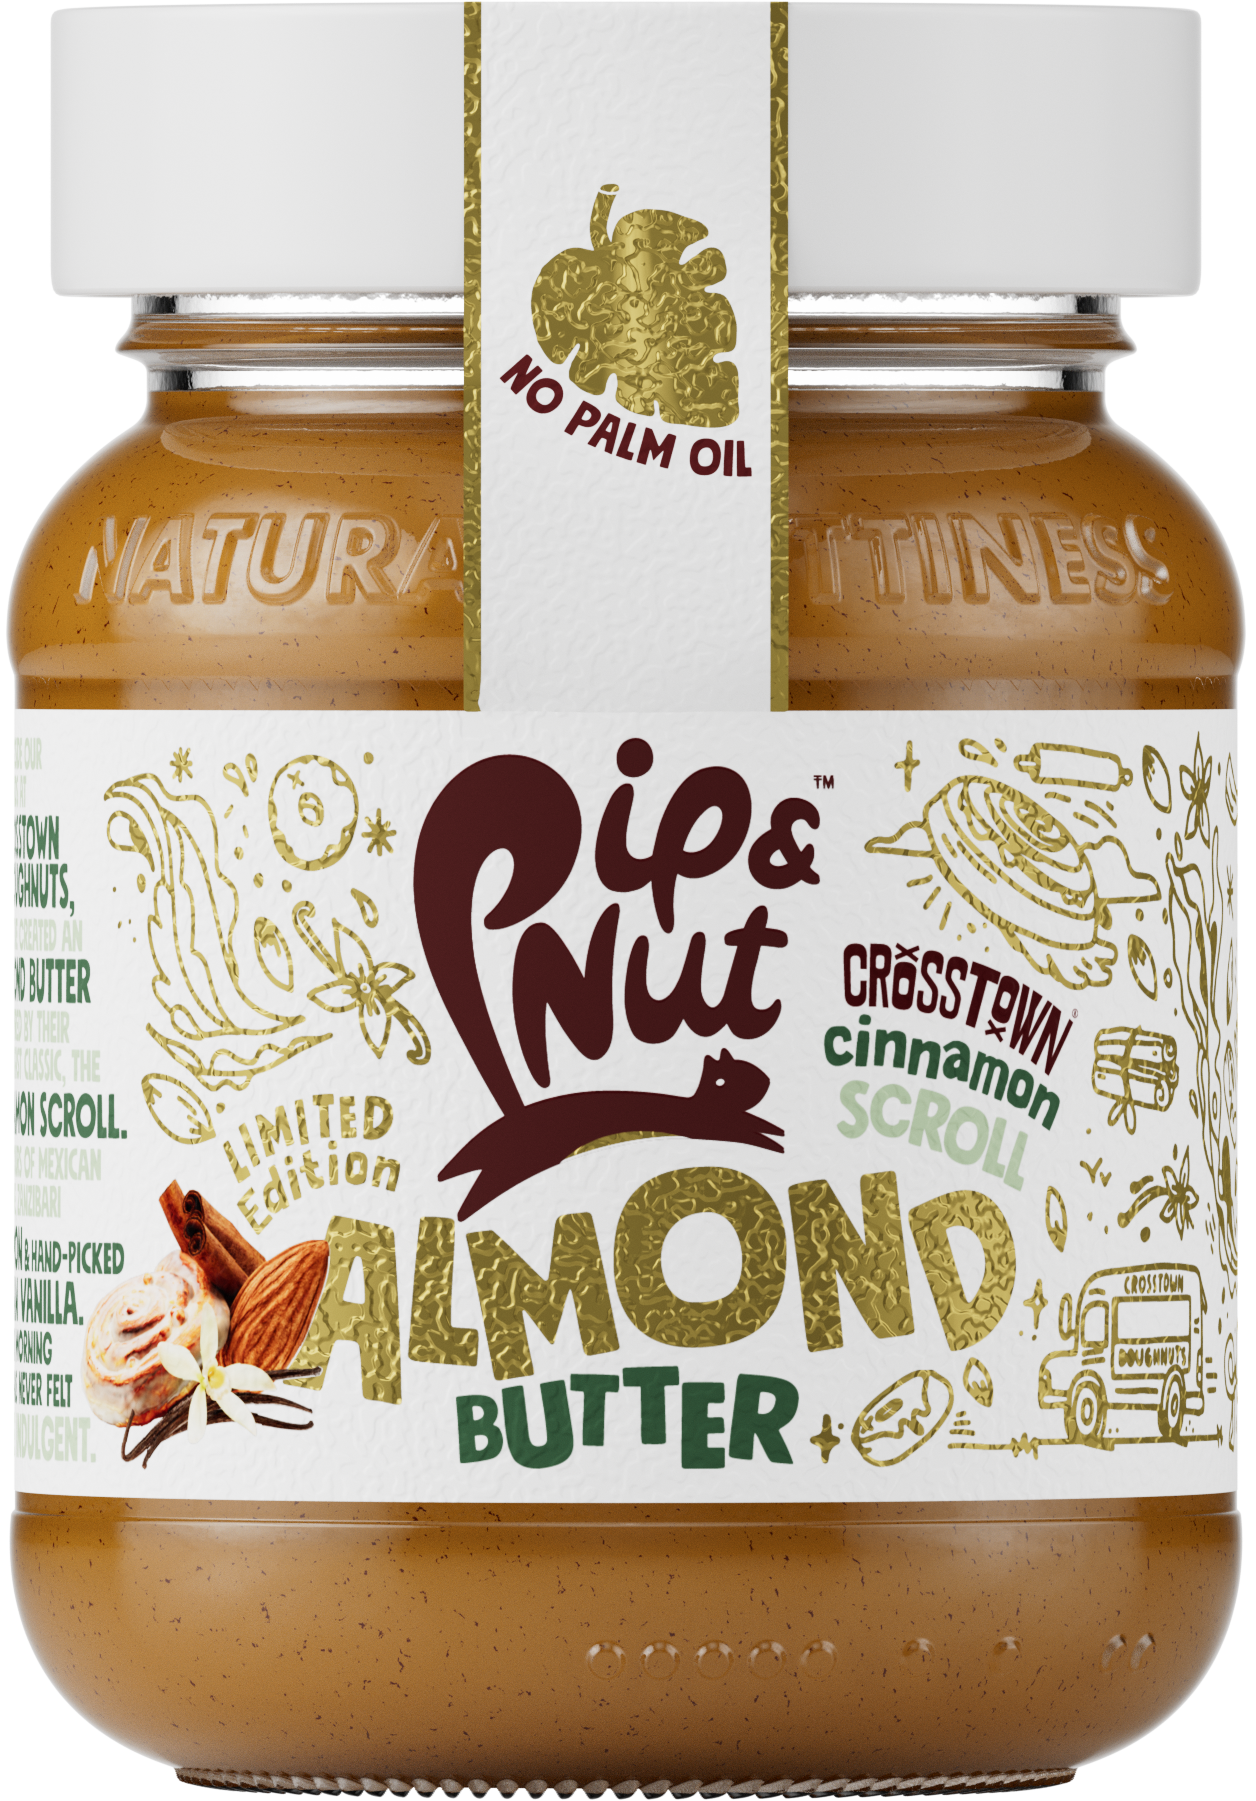 Pip & Nut partners with Crosstown to create limited edition